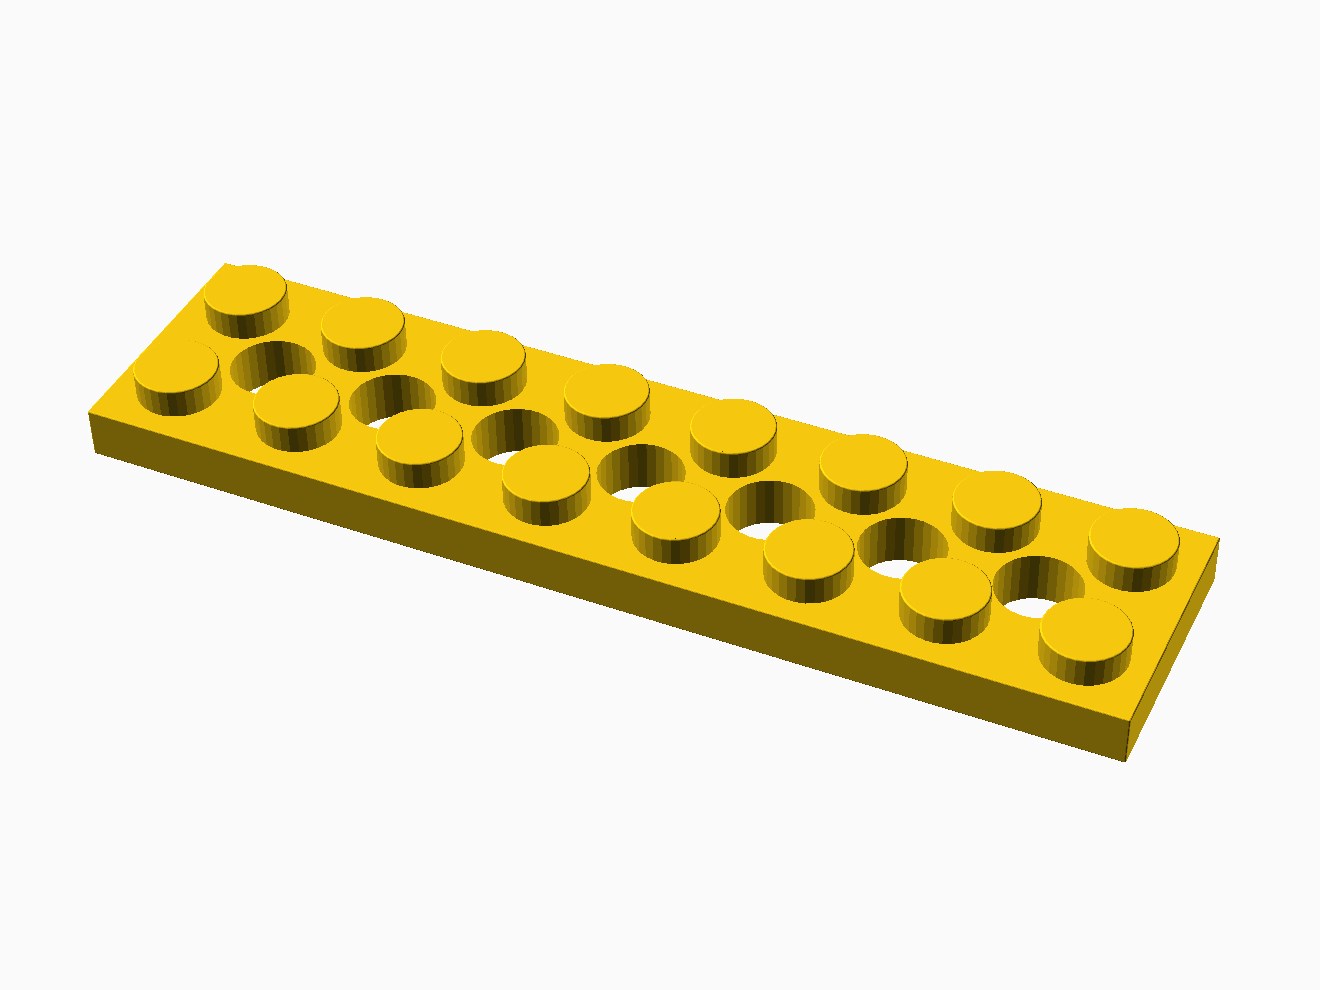 3D printable model of a LEGO Technic 8x2 Plate.